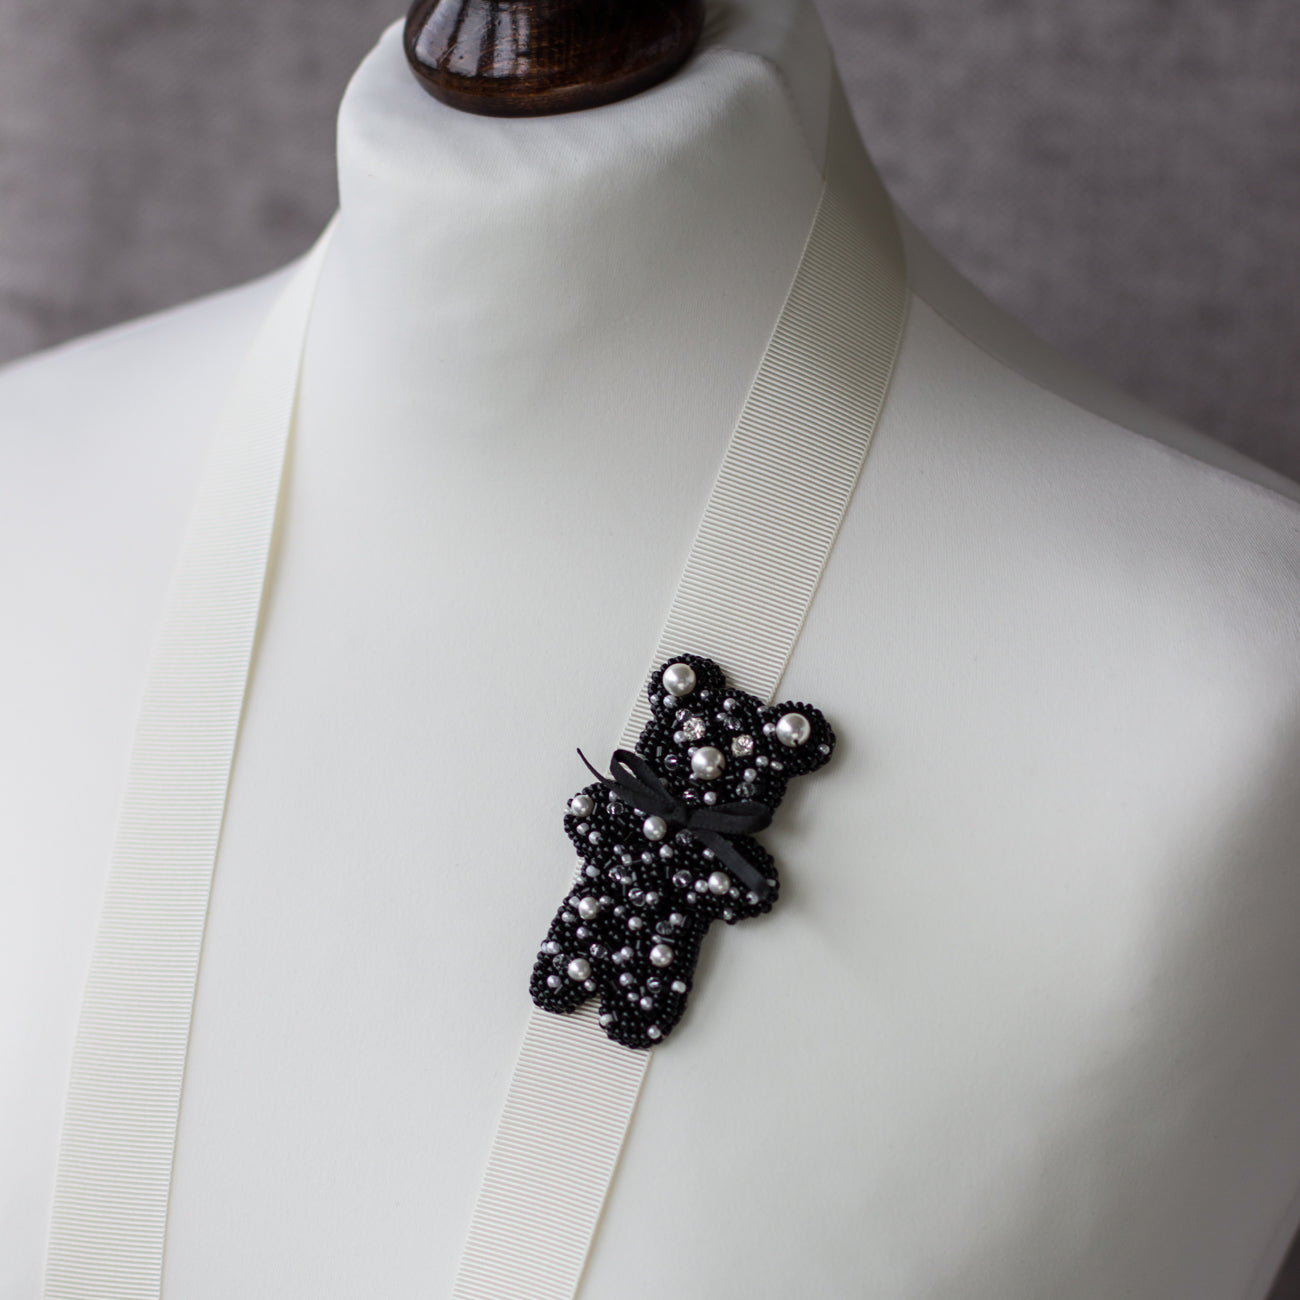 Find the perfect accessories at  LeFlowers Boutique. Black teddy bear brooch with pearls. Black embroidered brooch. Teddy bear brooch. Gift idea. Handmade bear brooch. Children accessories